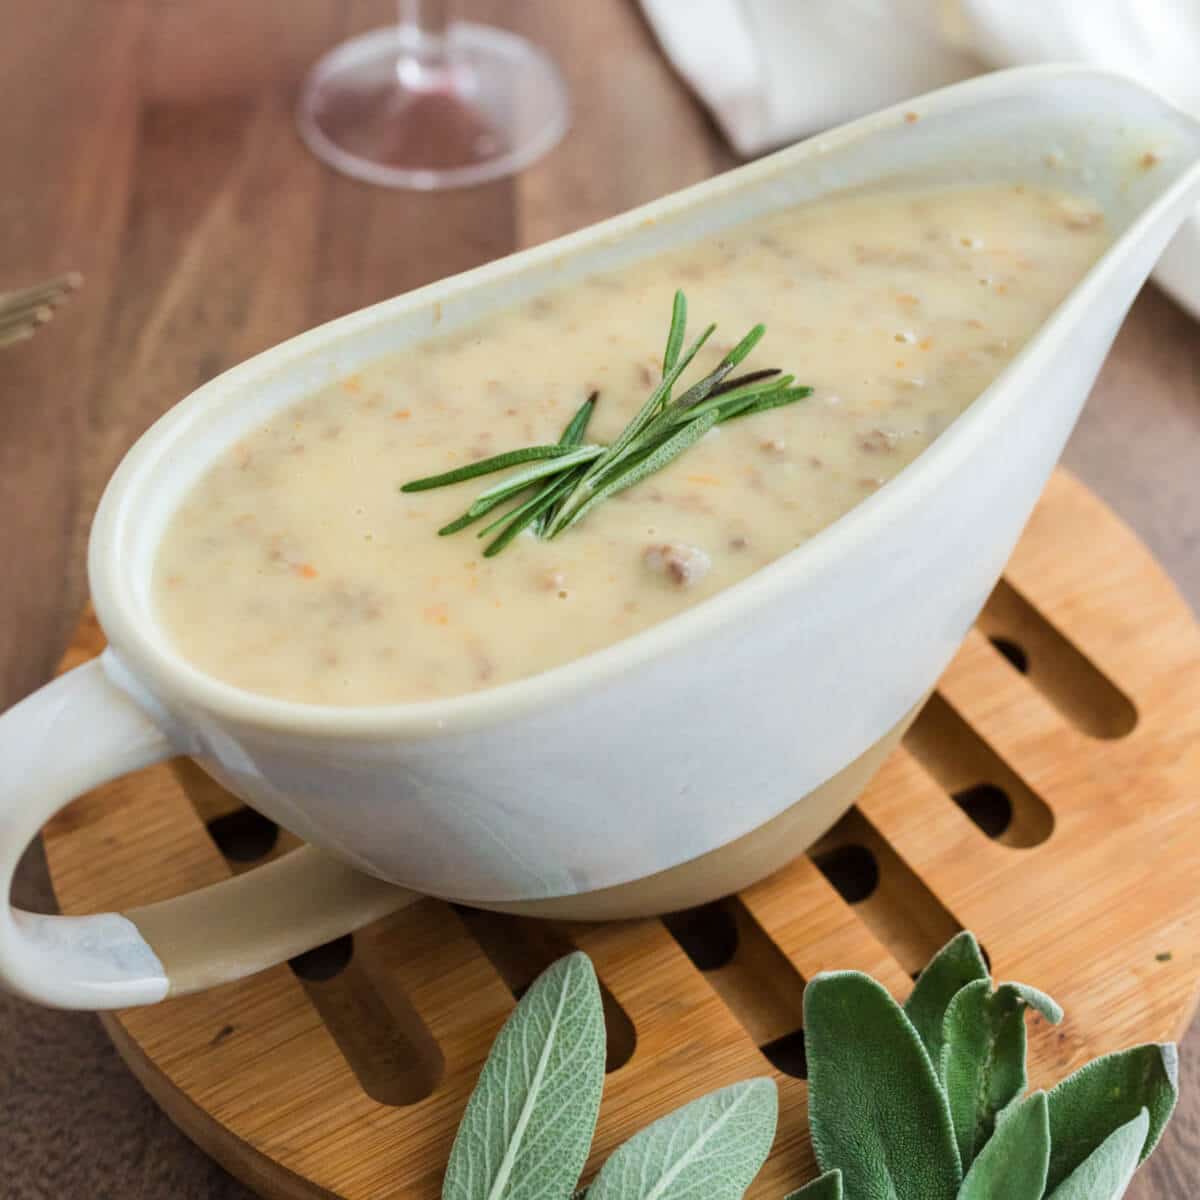 How to Make Giblet Gravy With Cream of Mushroom Soup? 